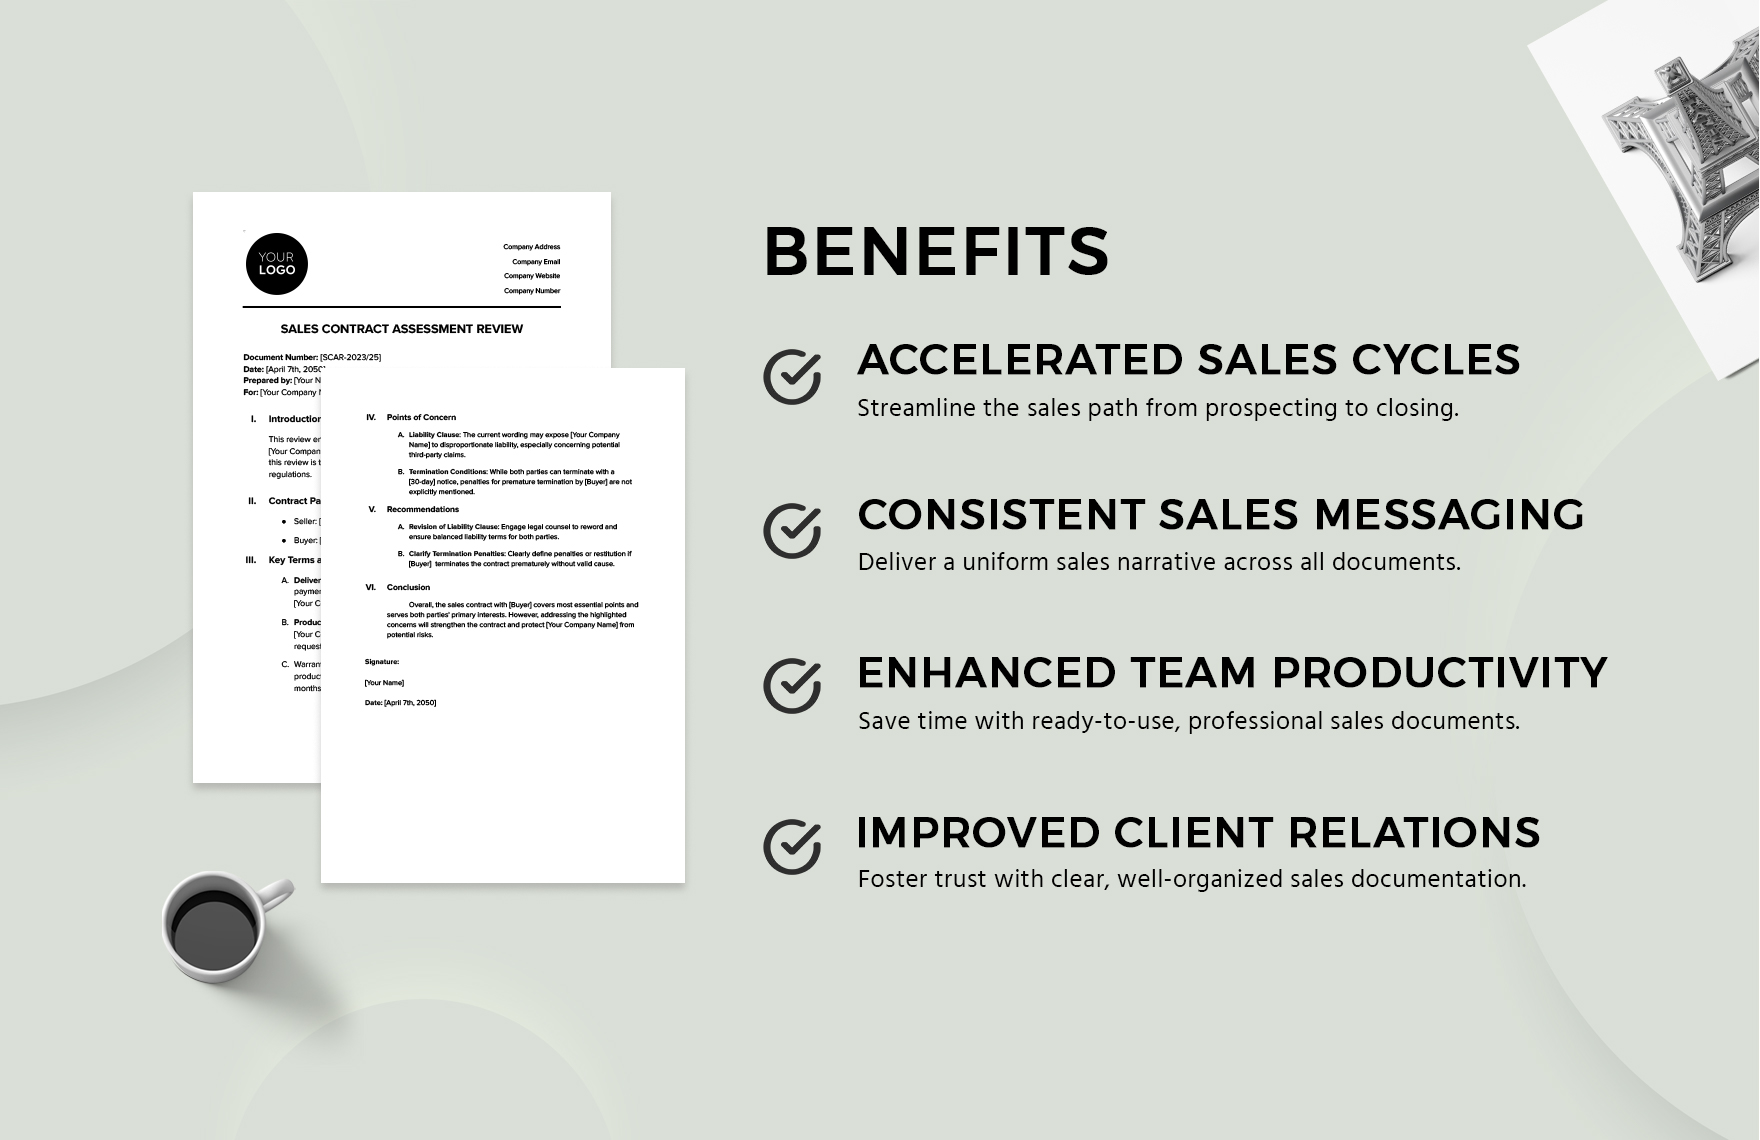 Sales Contract Assessment Review Template